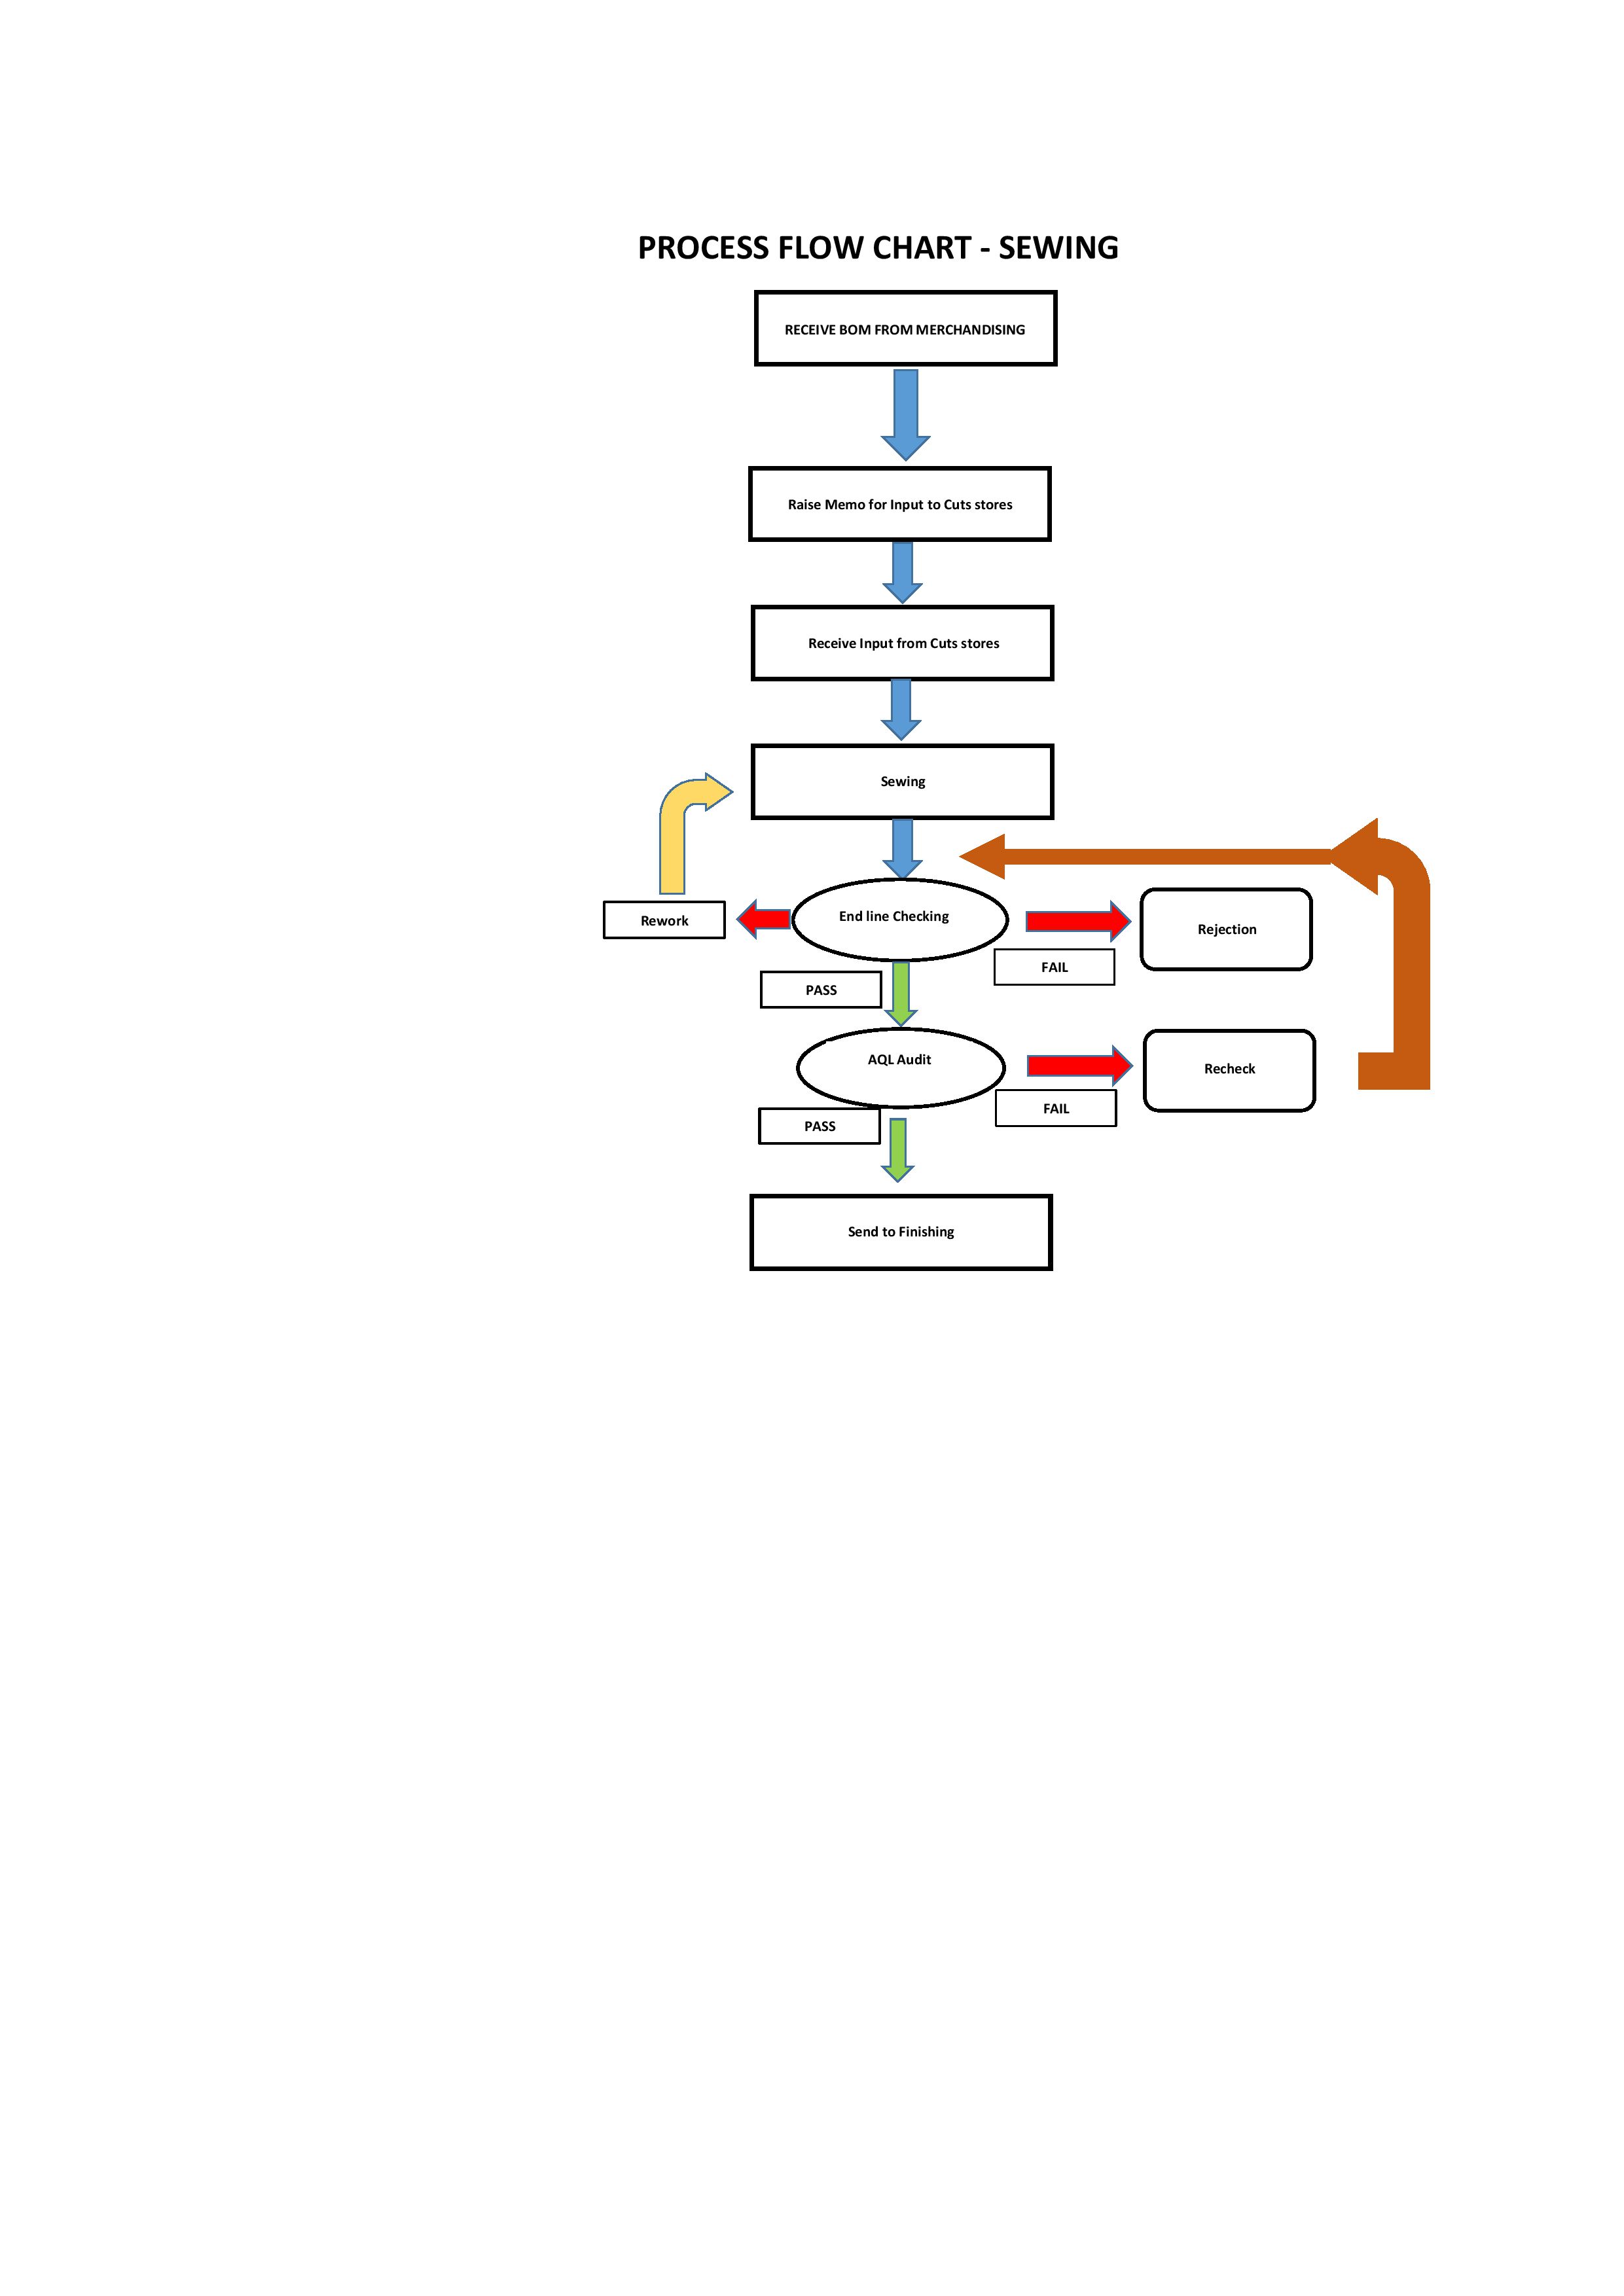 Processing Flow Chart : Sewing